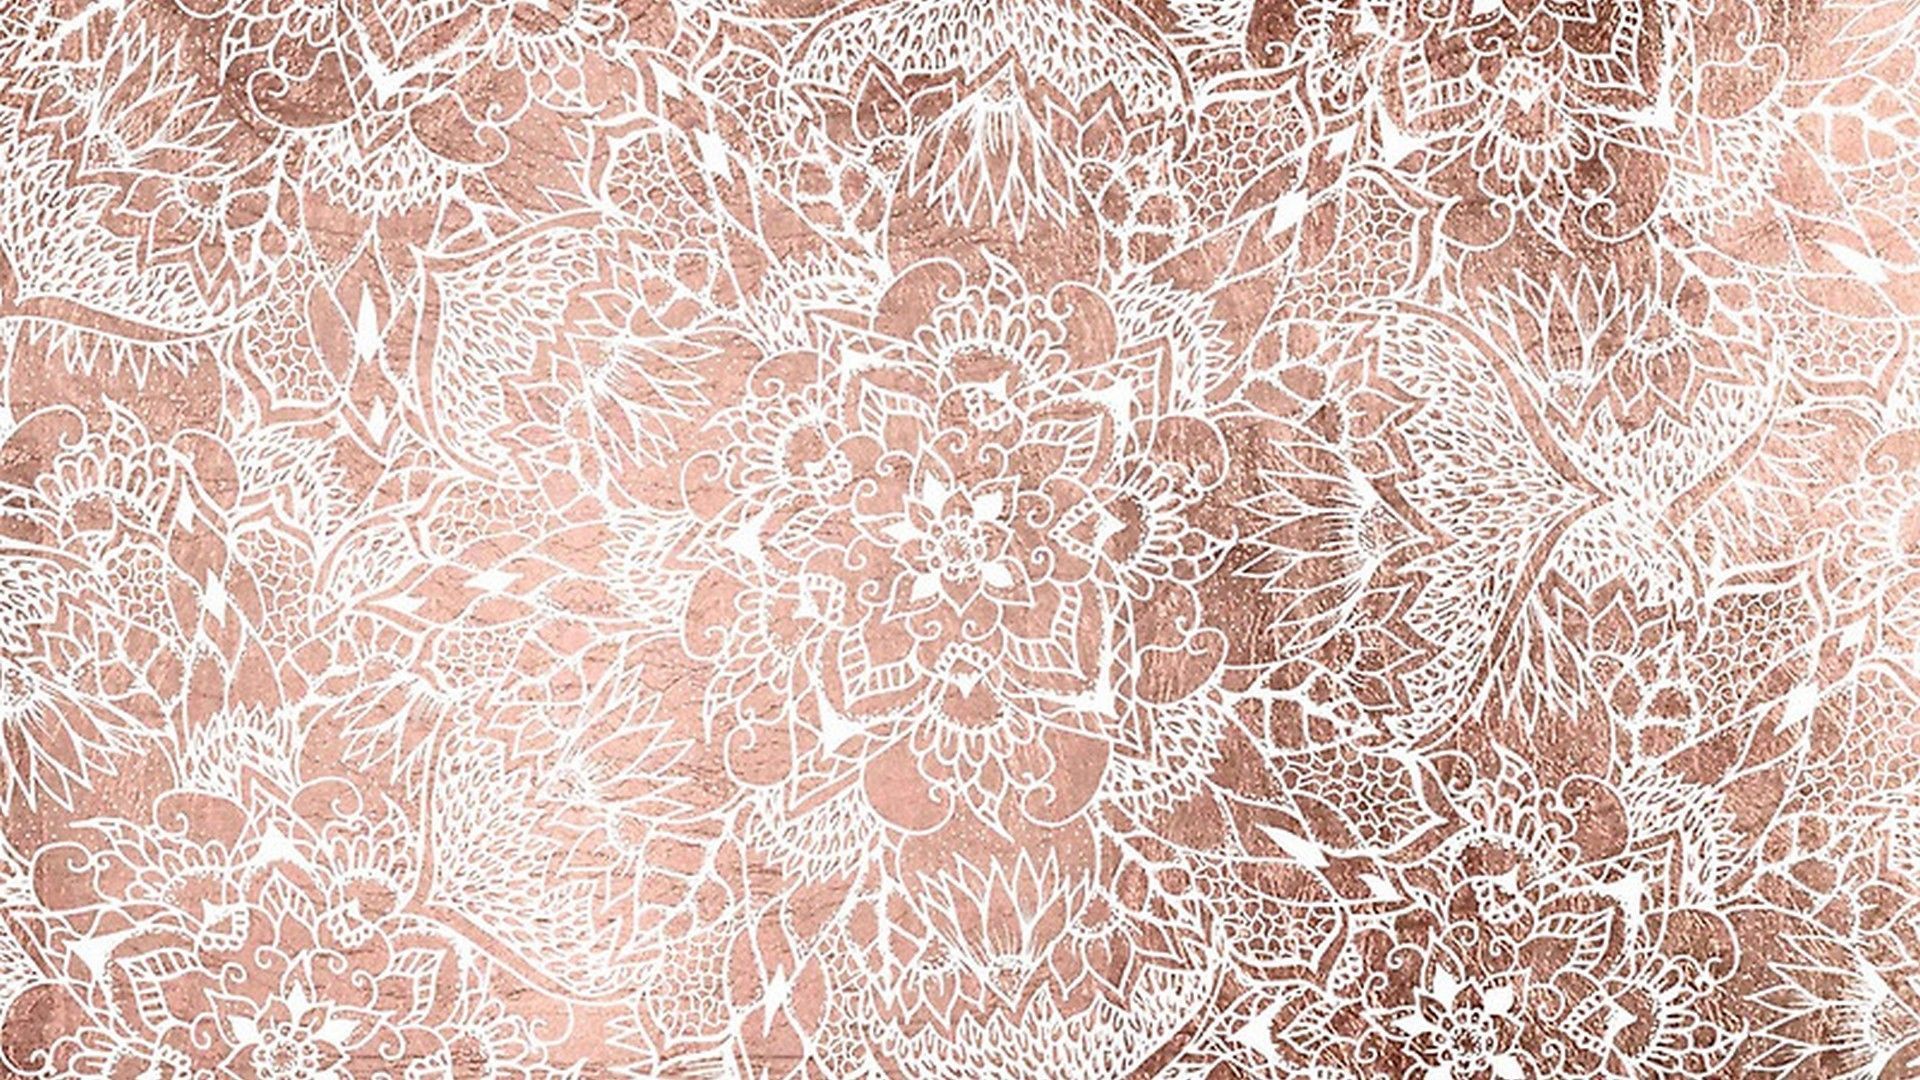 A rose gold and white floral pattern on a metallic background - Rose gold